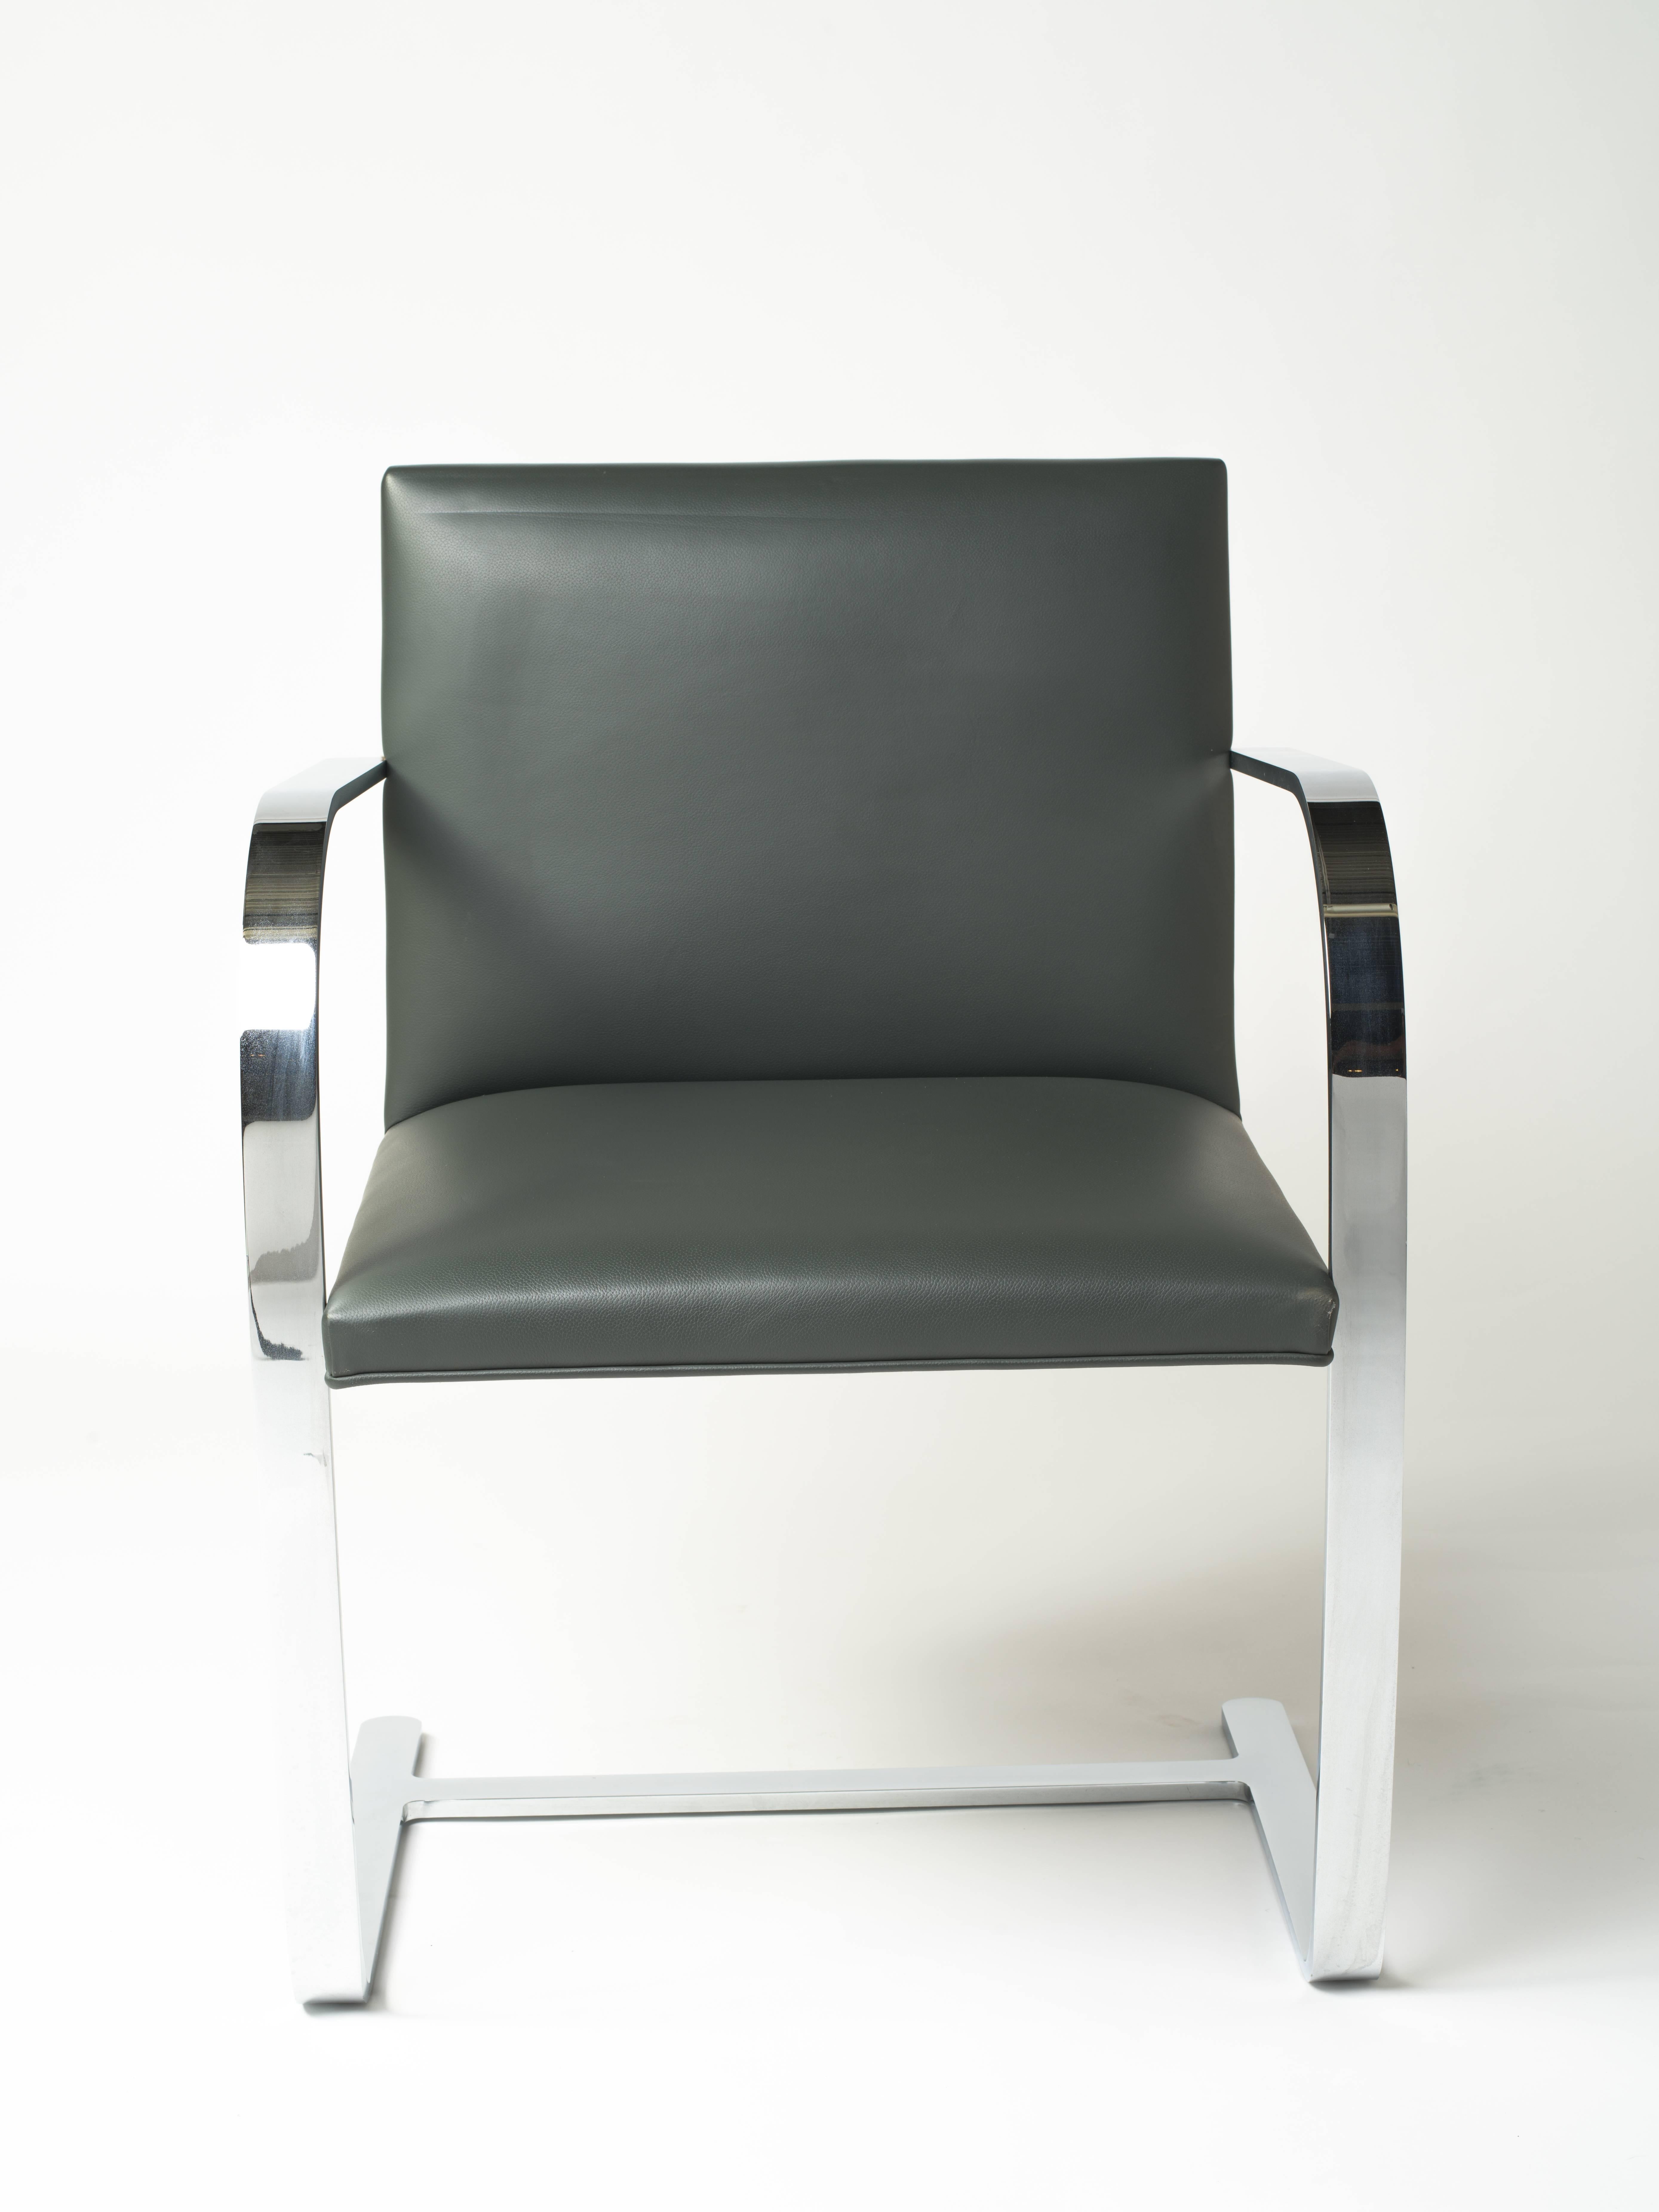 Polished Pair of Brno Chairs in Elephant Grey Leather by Knoll Studio